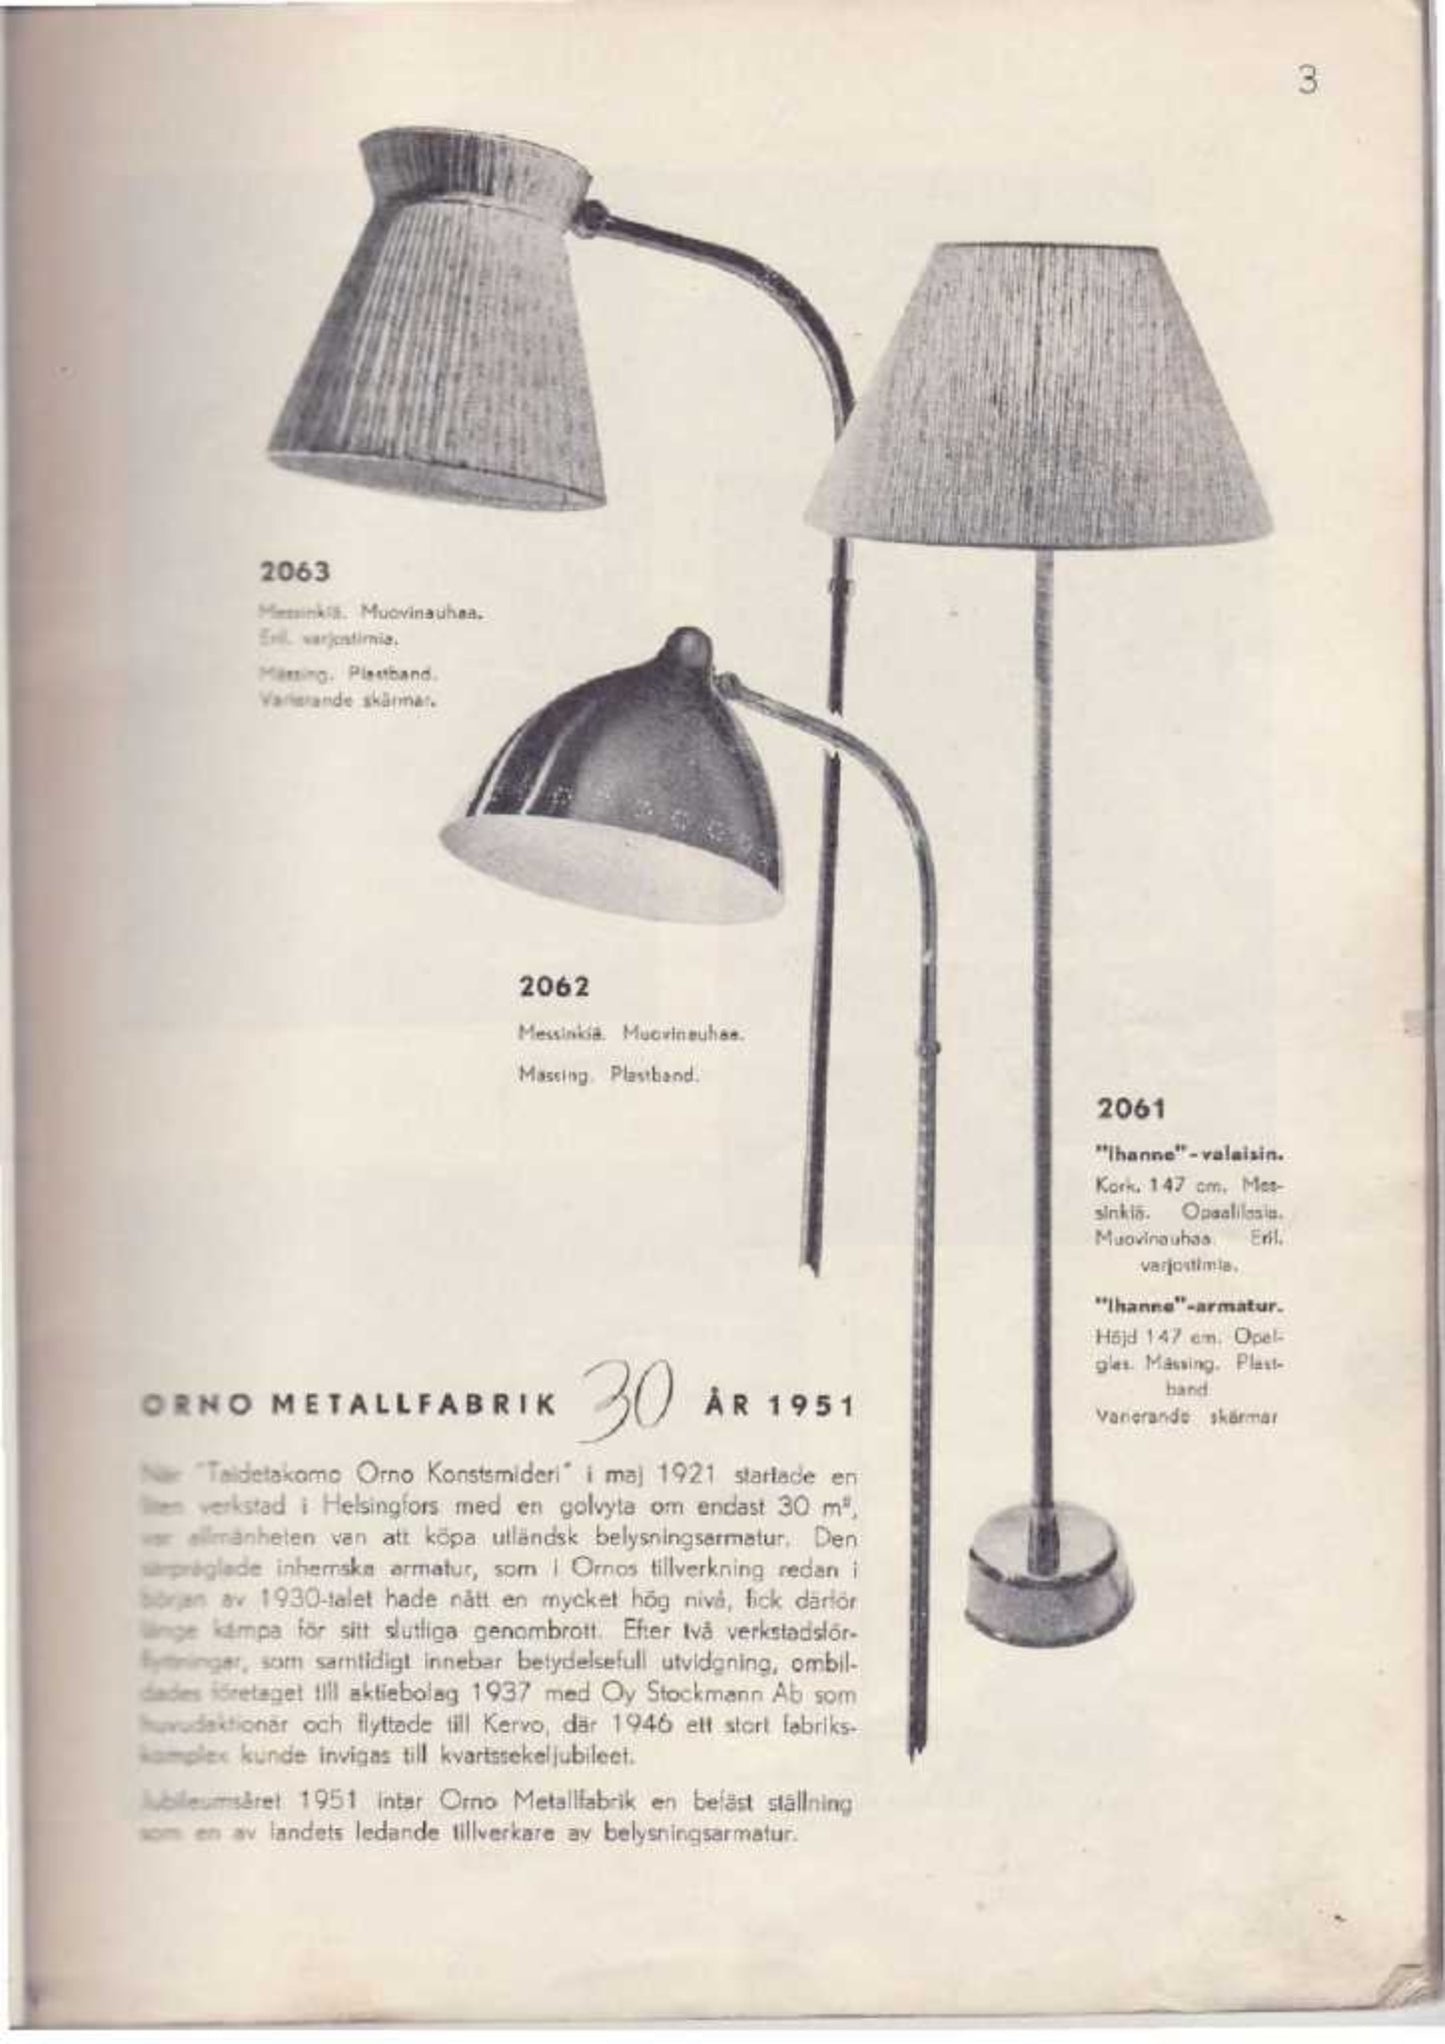 Lisa Johansson-Pape Faux Leather Wrapped Floor Lamp, 1951 - SOLD!